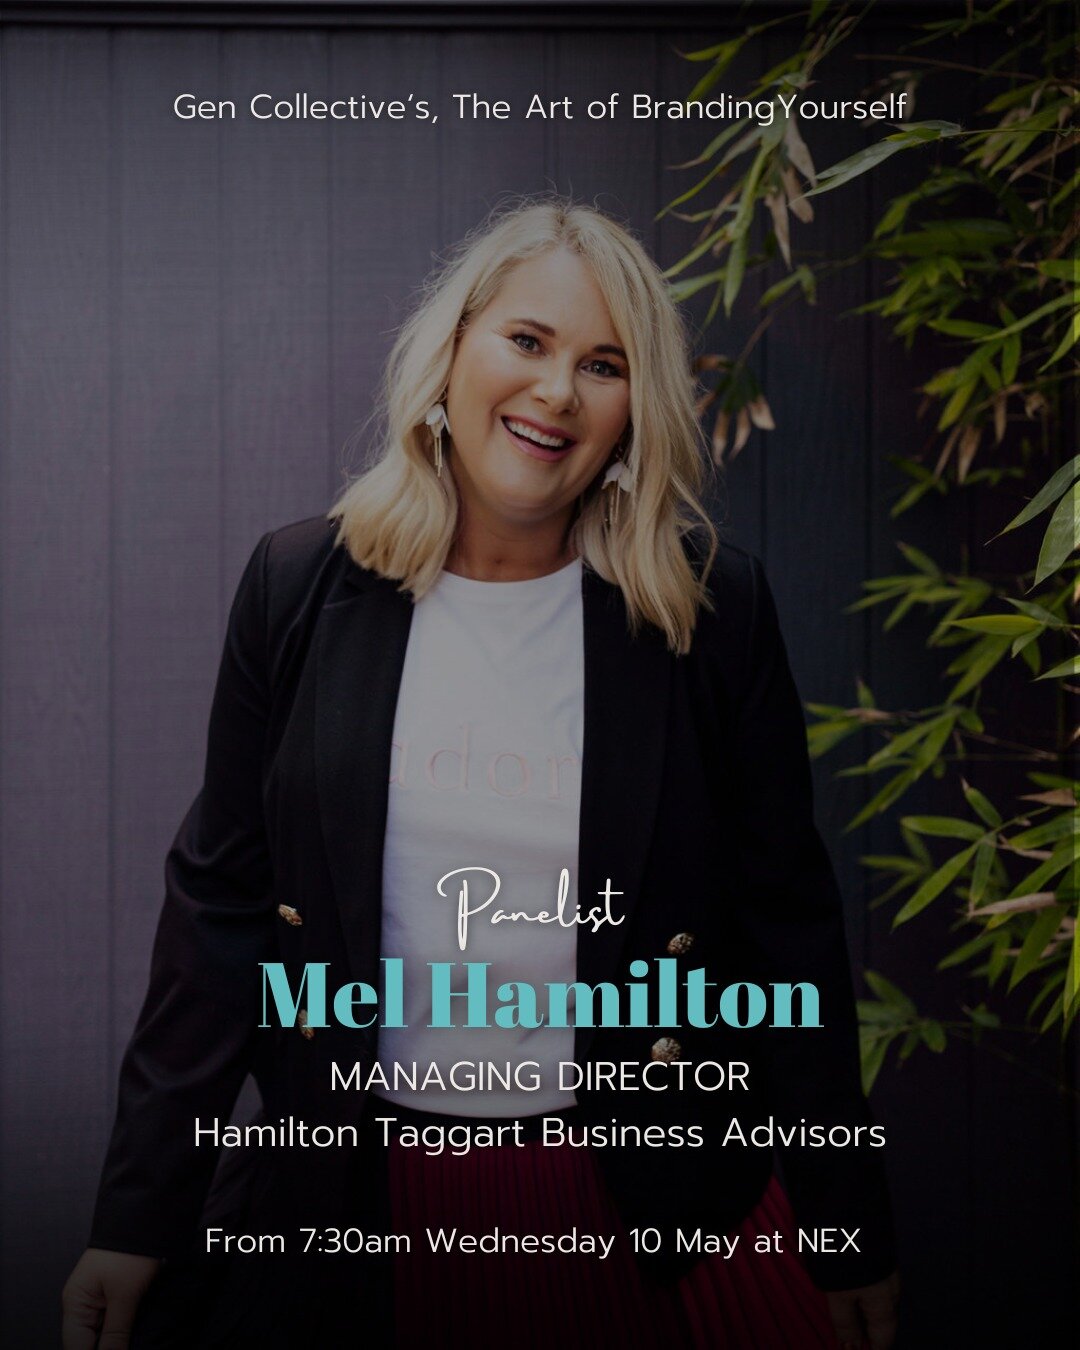 Presenting you with our final panelist...Melanie Hamilton, Managing Director at Hamilton Taggart 👏

Mel is well-known in the local business community of Newcastle as both an accountant and networker. She's made a name for herself in a strongly male-